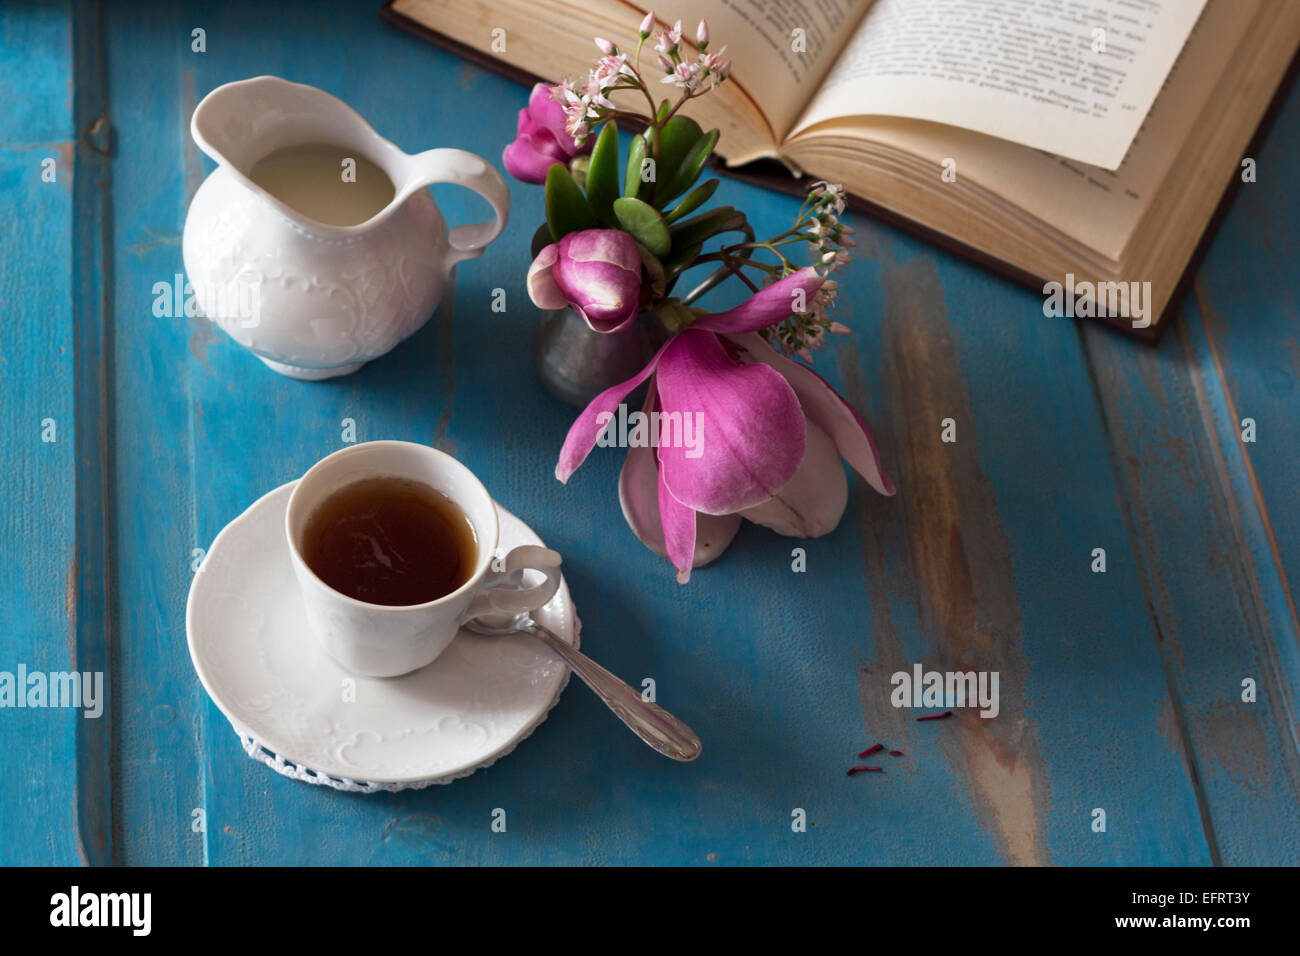 A tea cup and creamer on old wooden table. Top view. Stock Photo